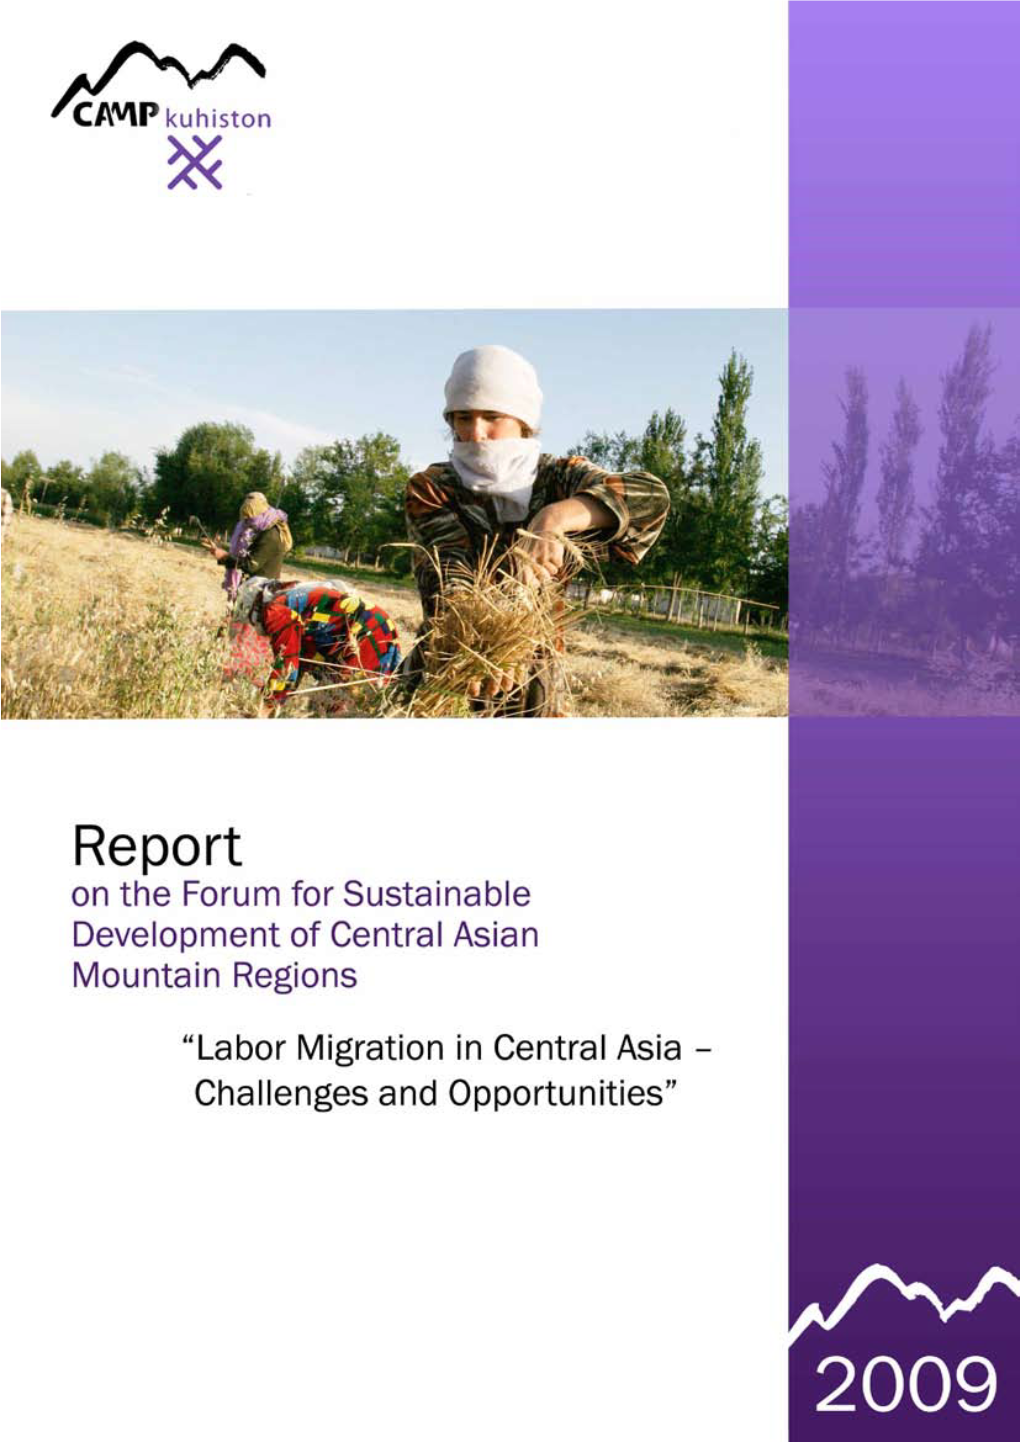 Labor Migration in Central Asia – Facing Challenges and Opportunities